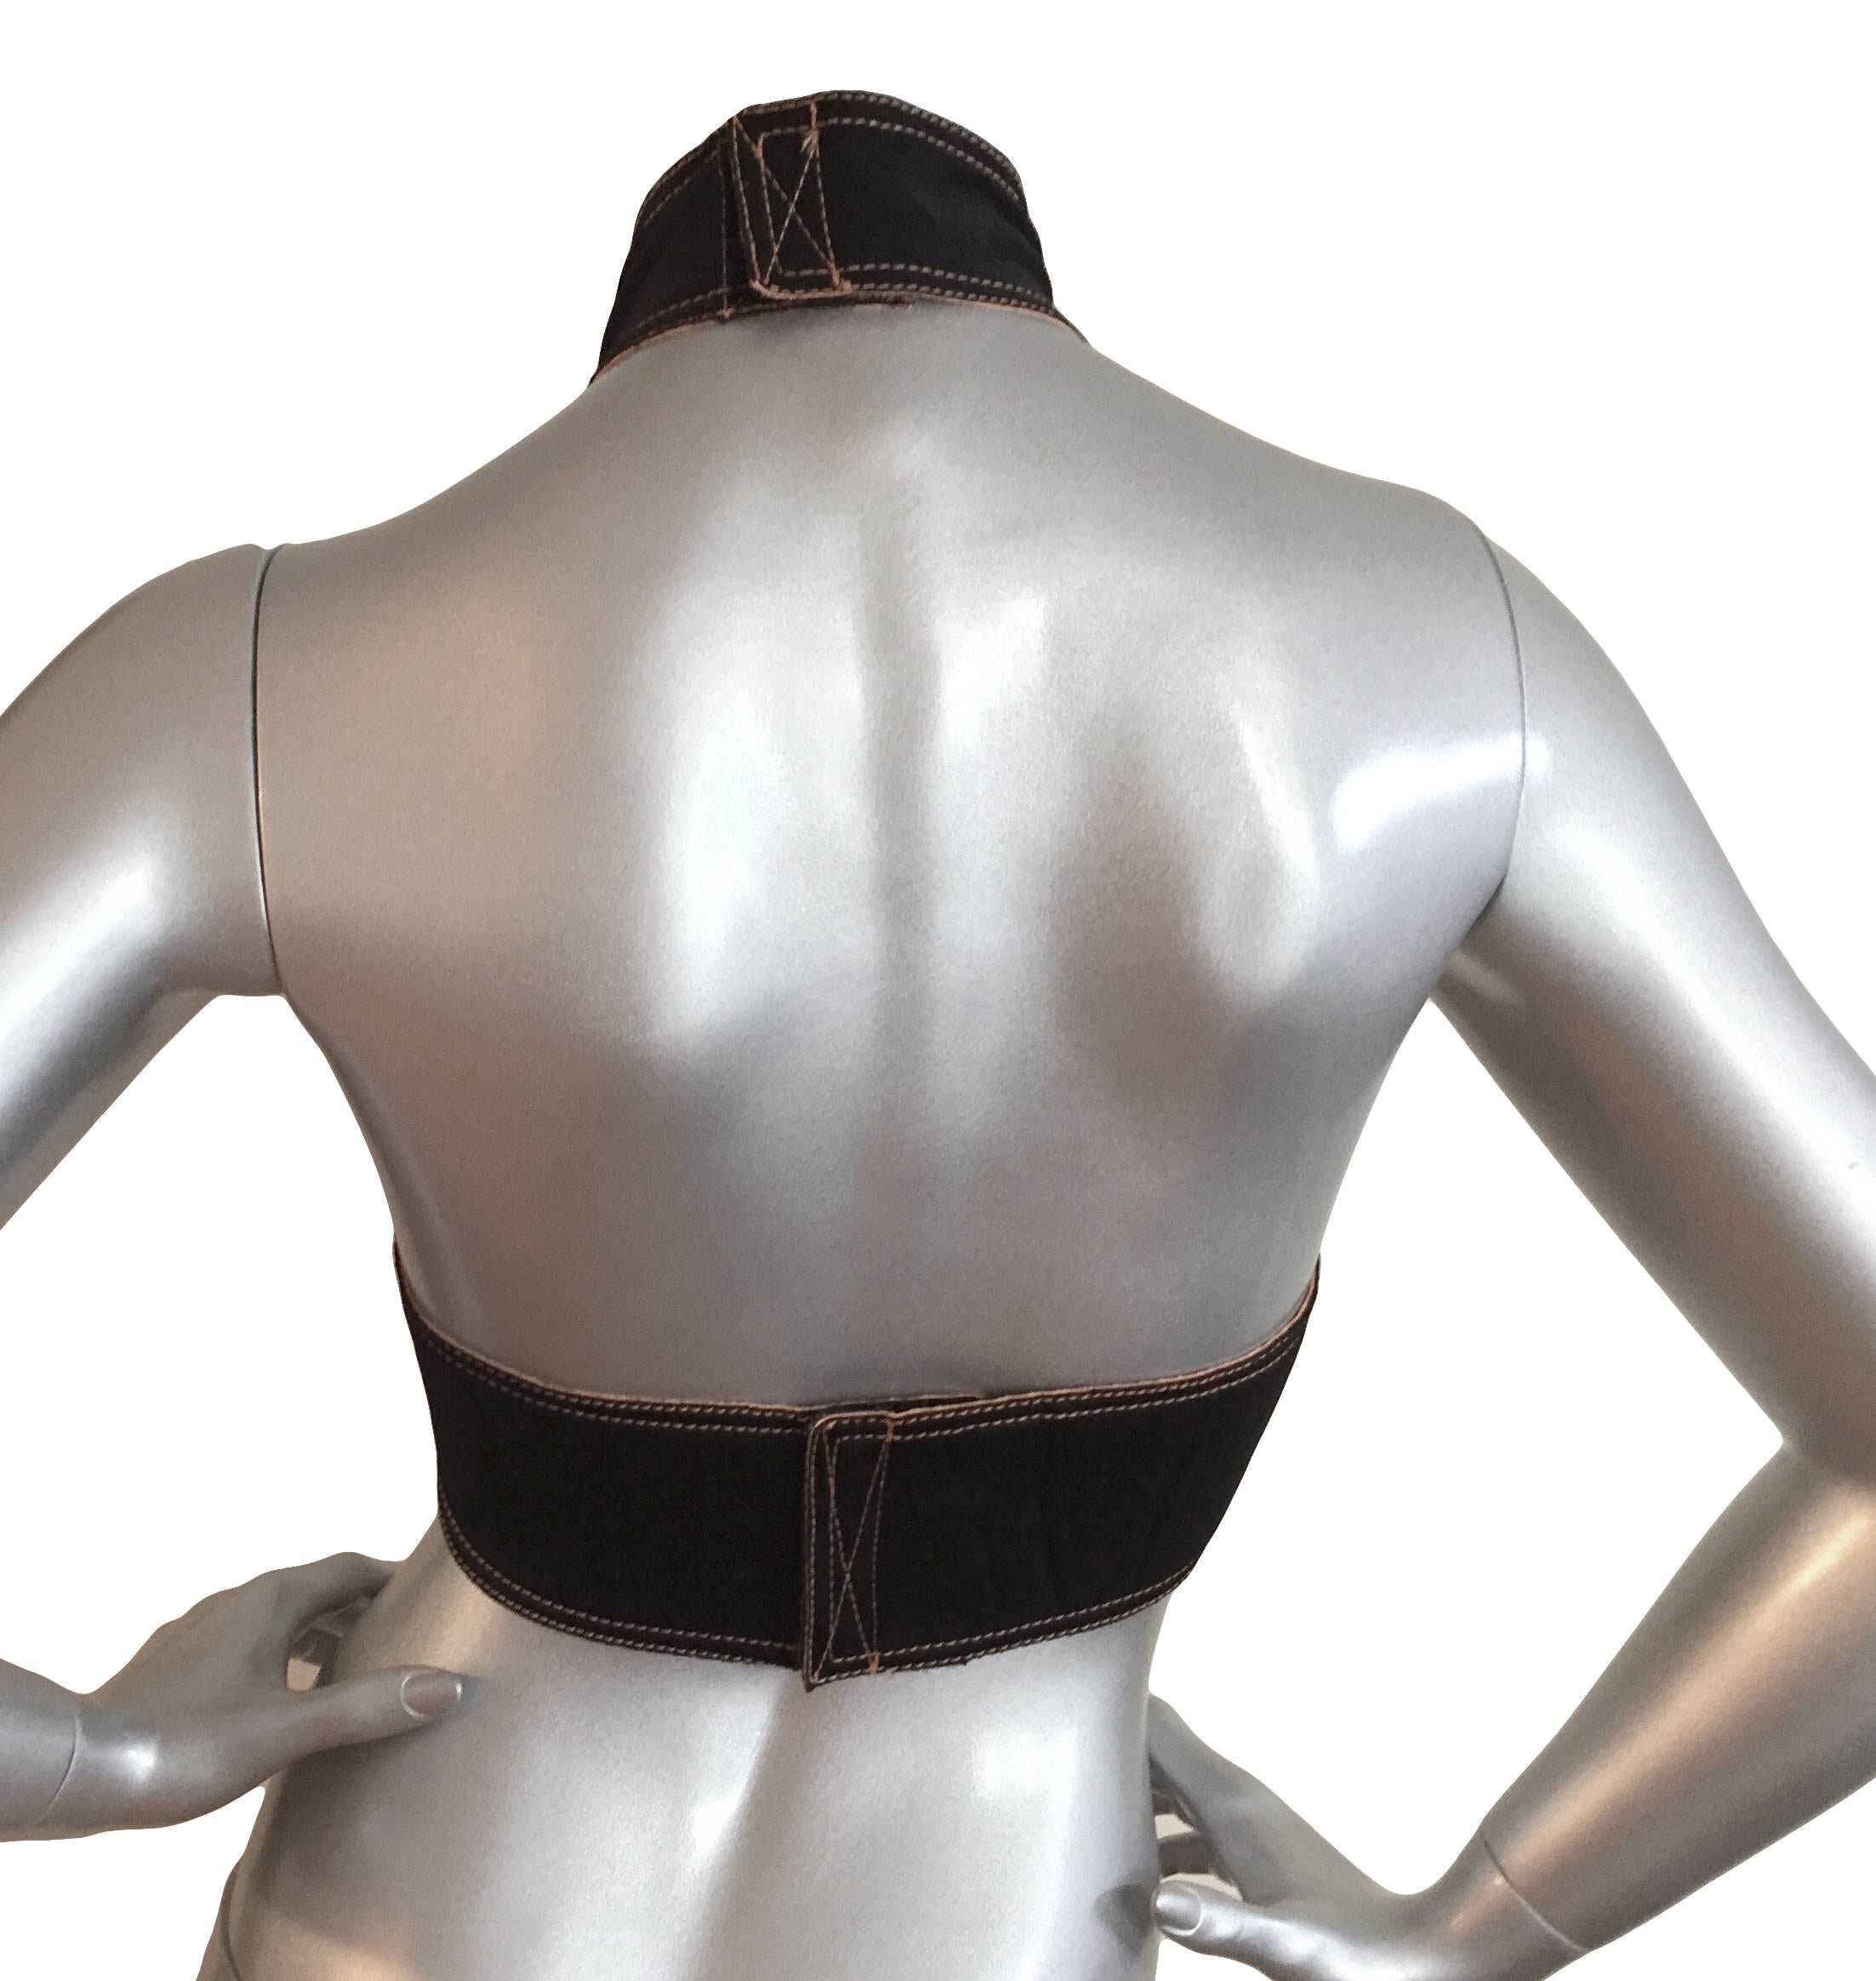 Knockout Jean Paul Gaultier Neoprene Halter Top In Excellent Condition For Sale In Bethesda, MD